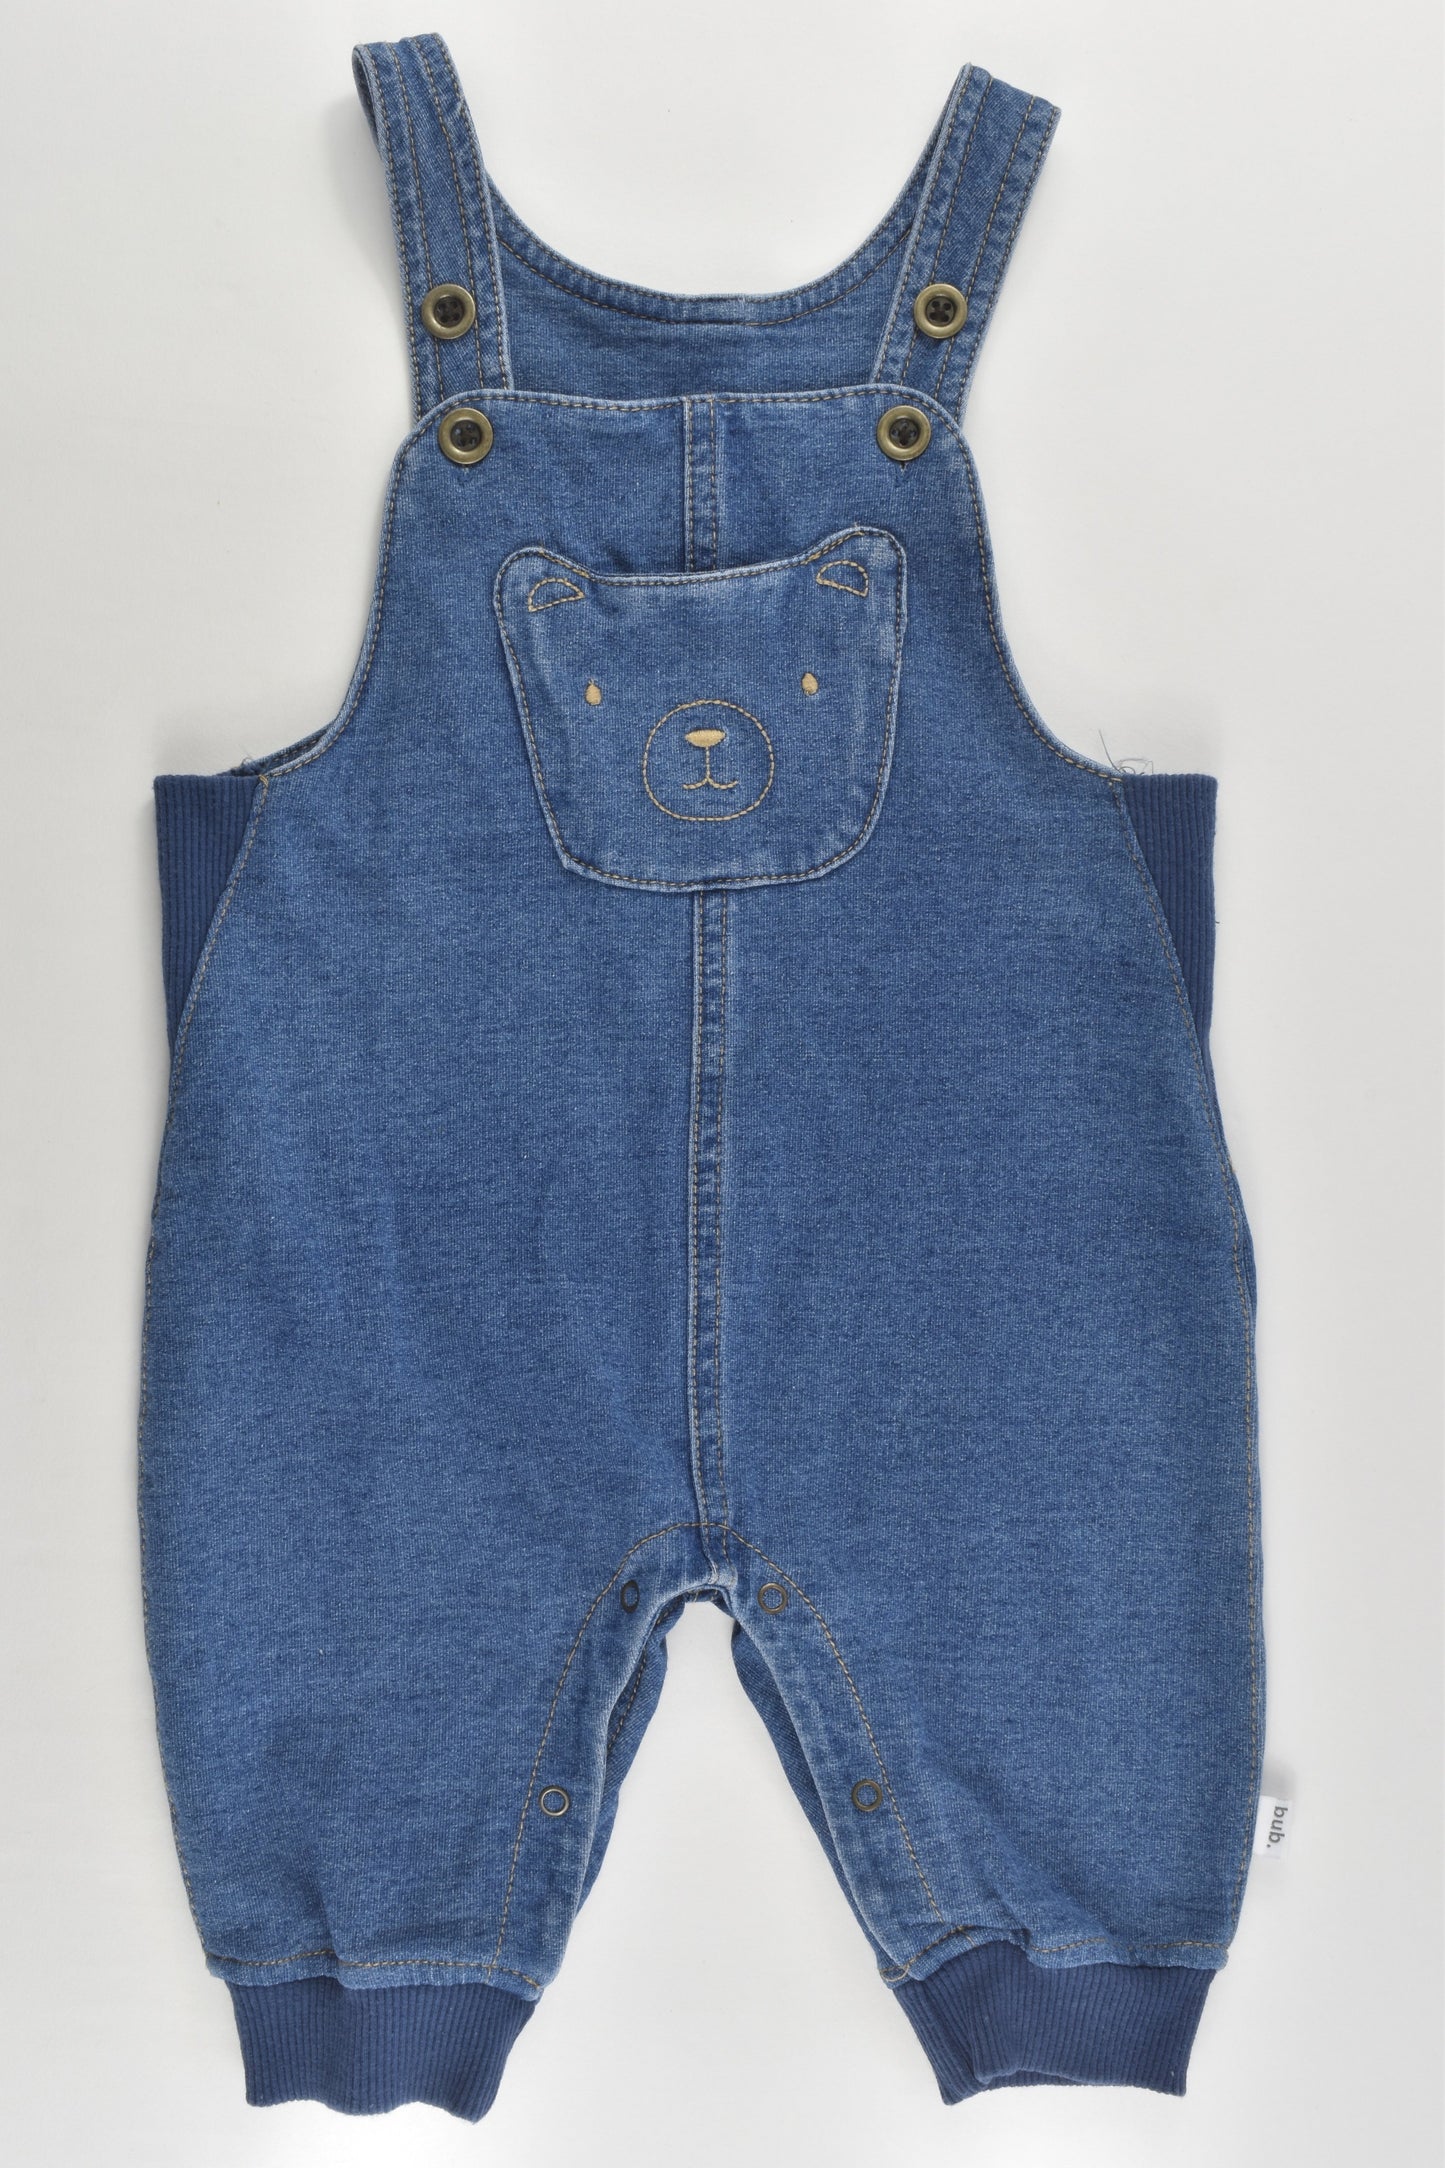 Target Size 00 (3-6 months) Teddy Stretchy Denim Overalls